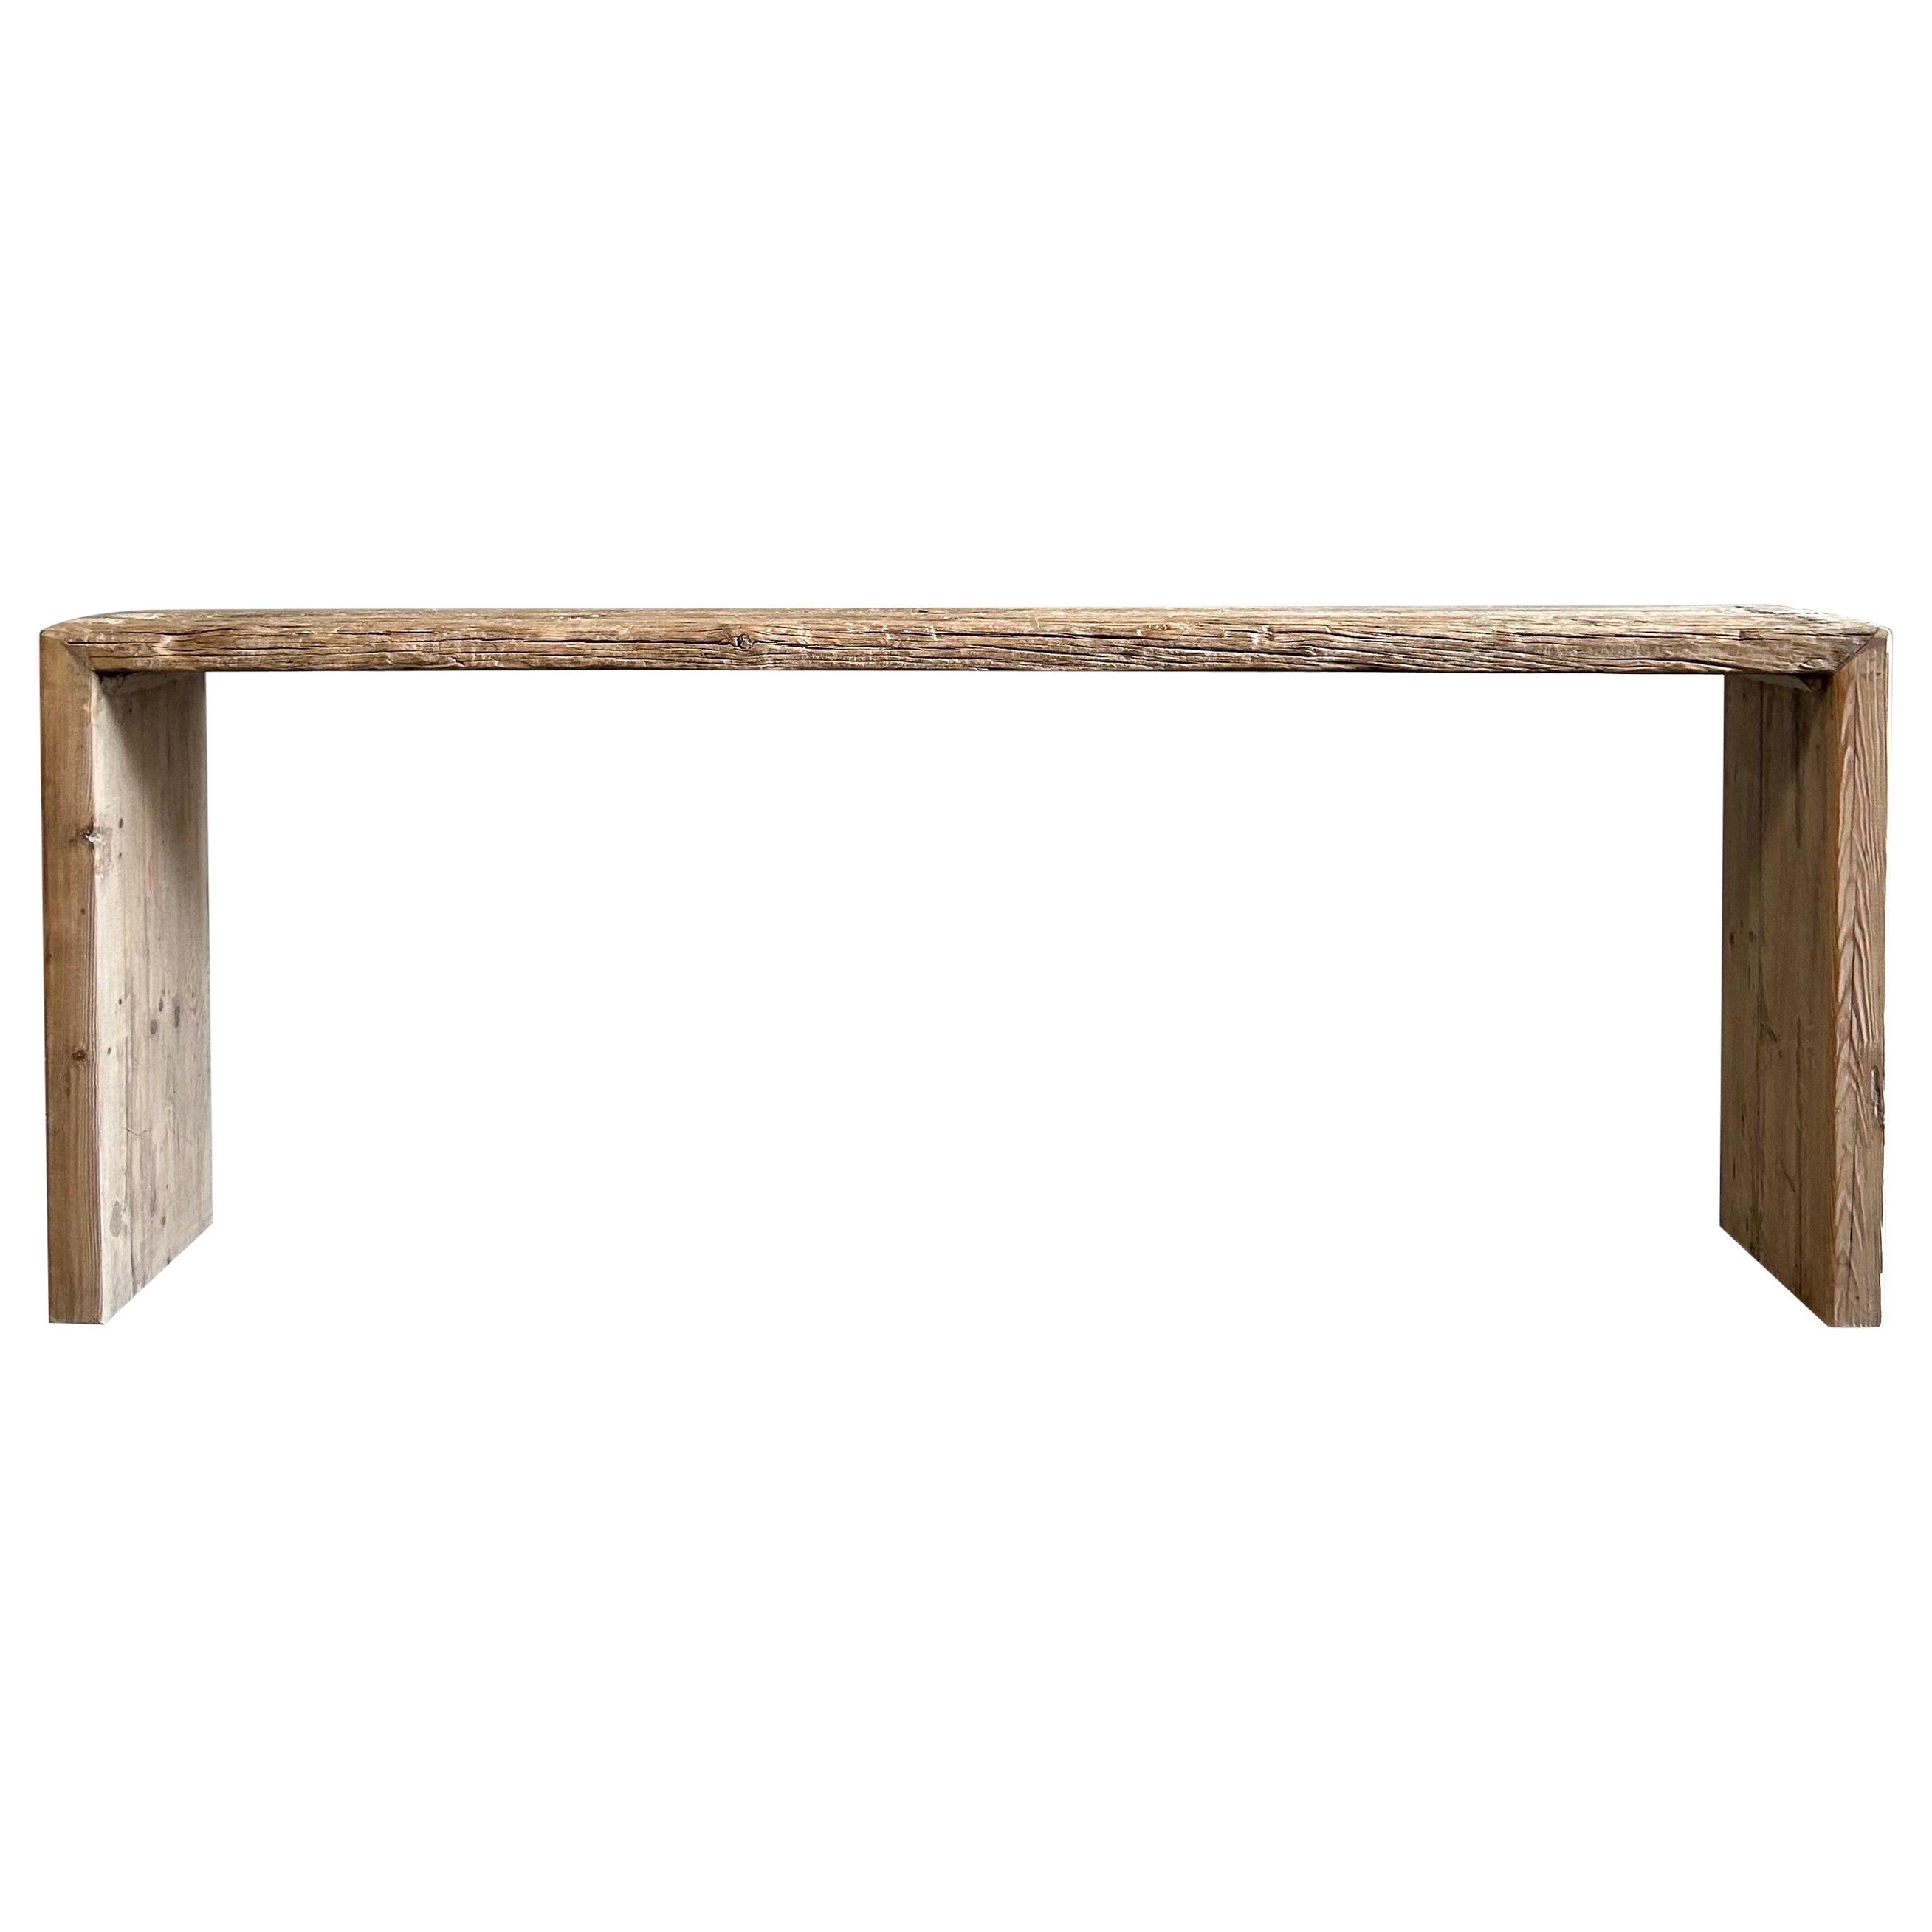 Vintage Elm Wood Waterfall Style Console Table For Sale